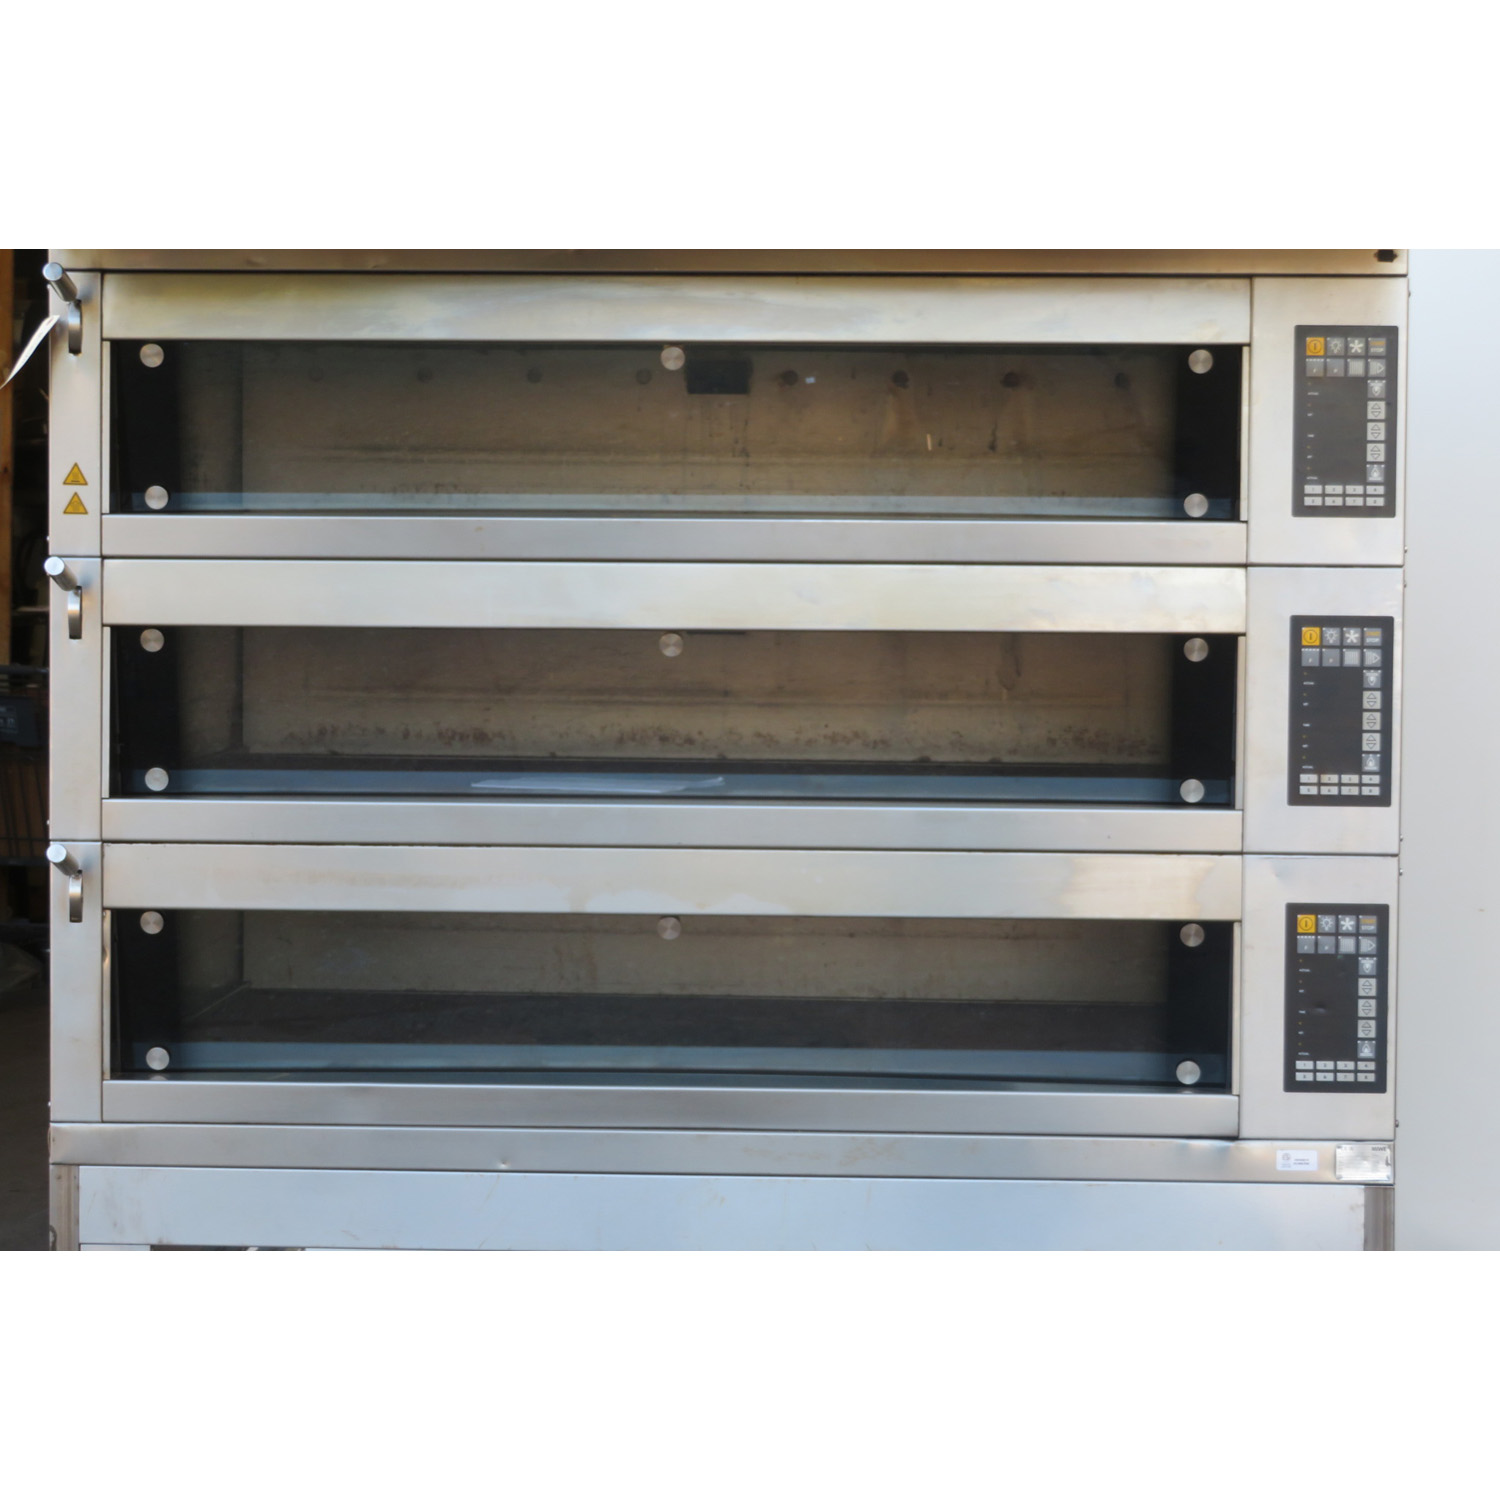 Miwe C0-3.1408 Electric 3 Deck Bakery Oven, Used Great Condition image 1